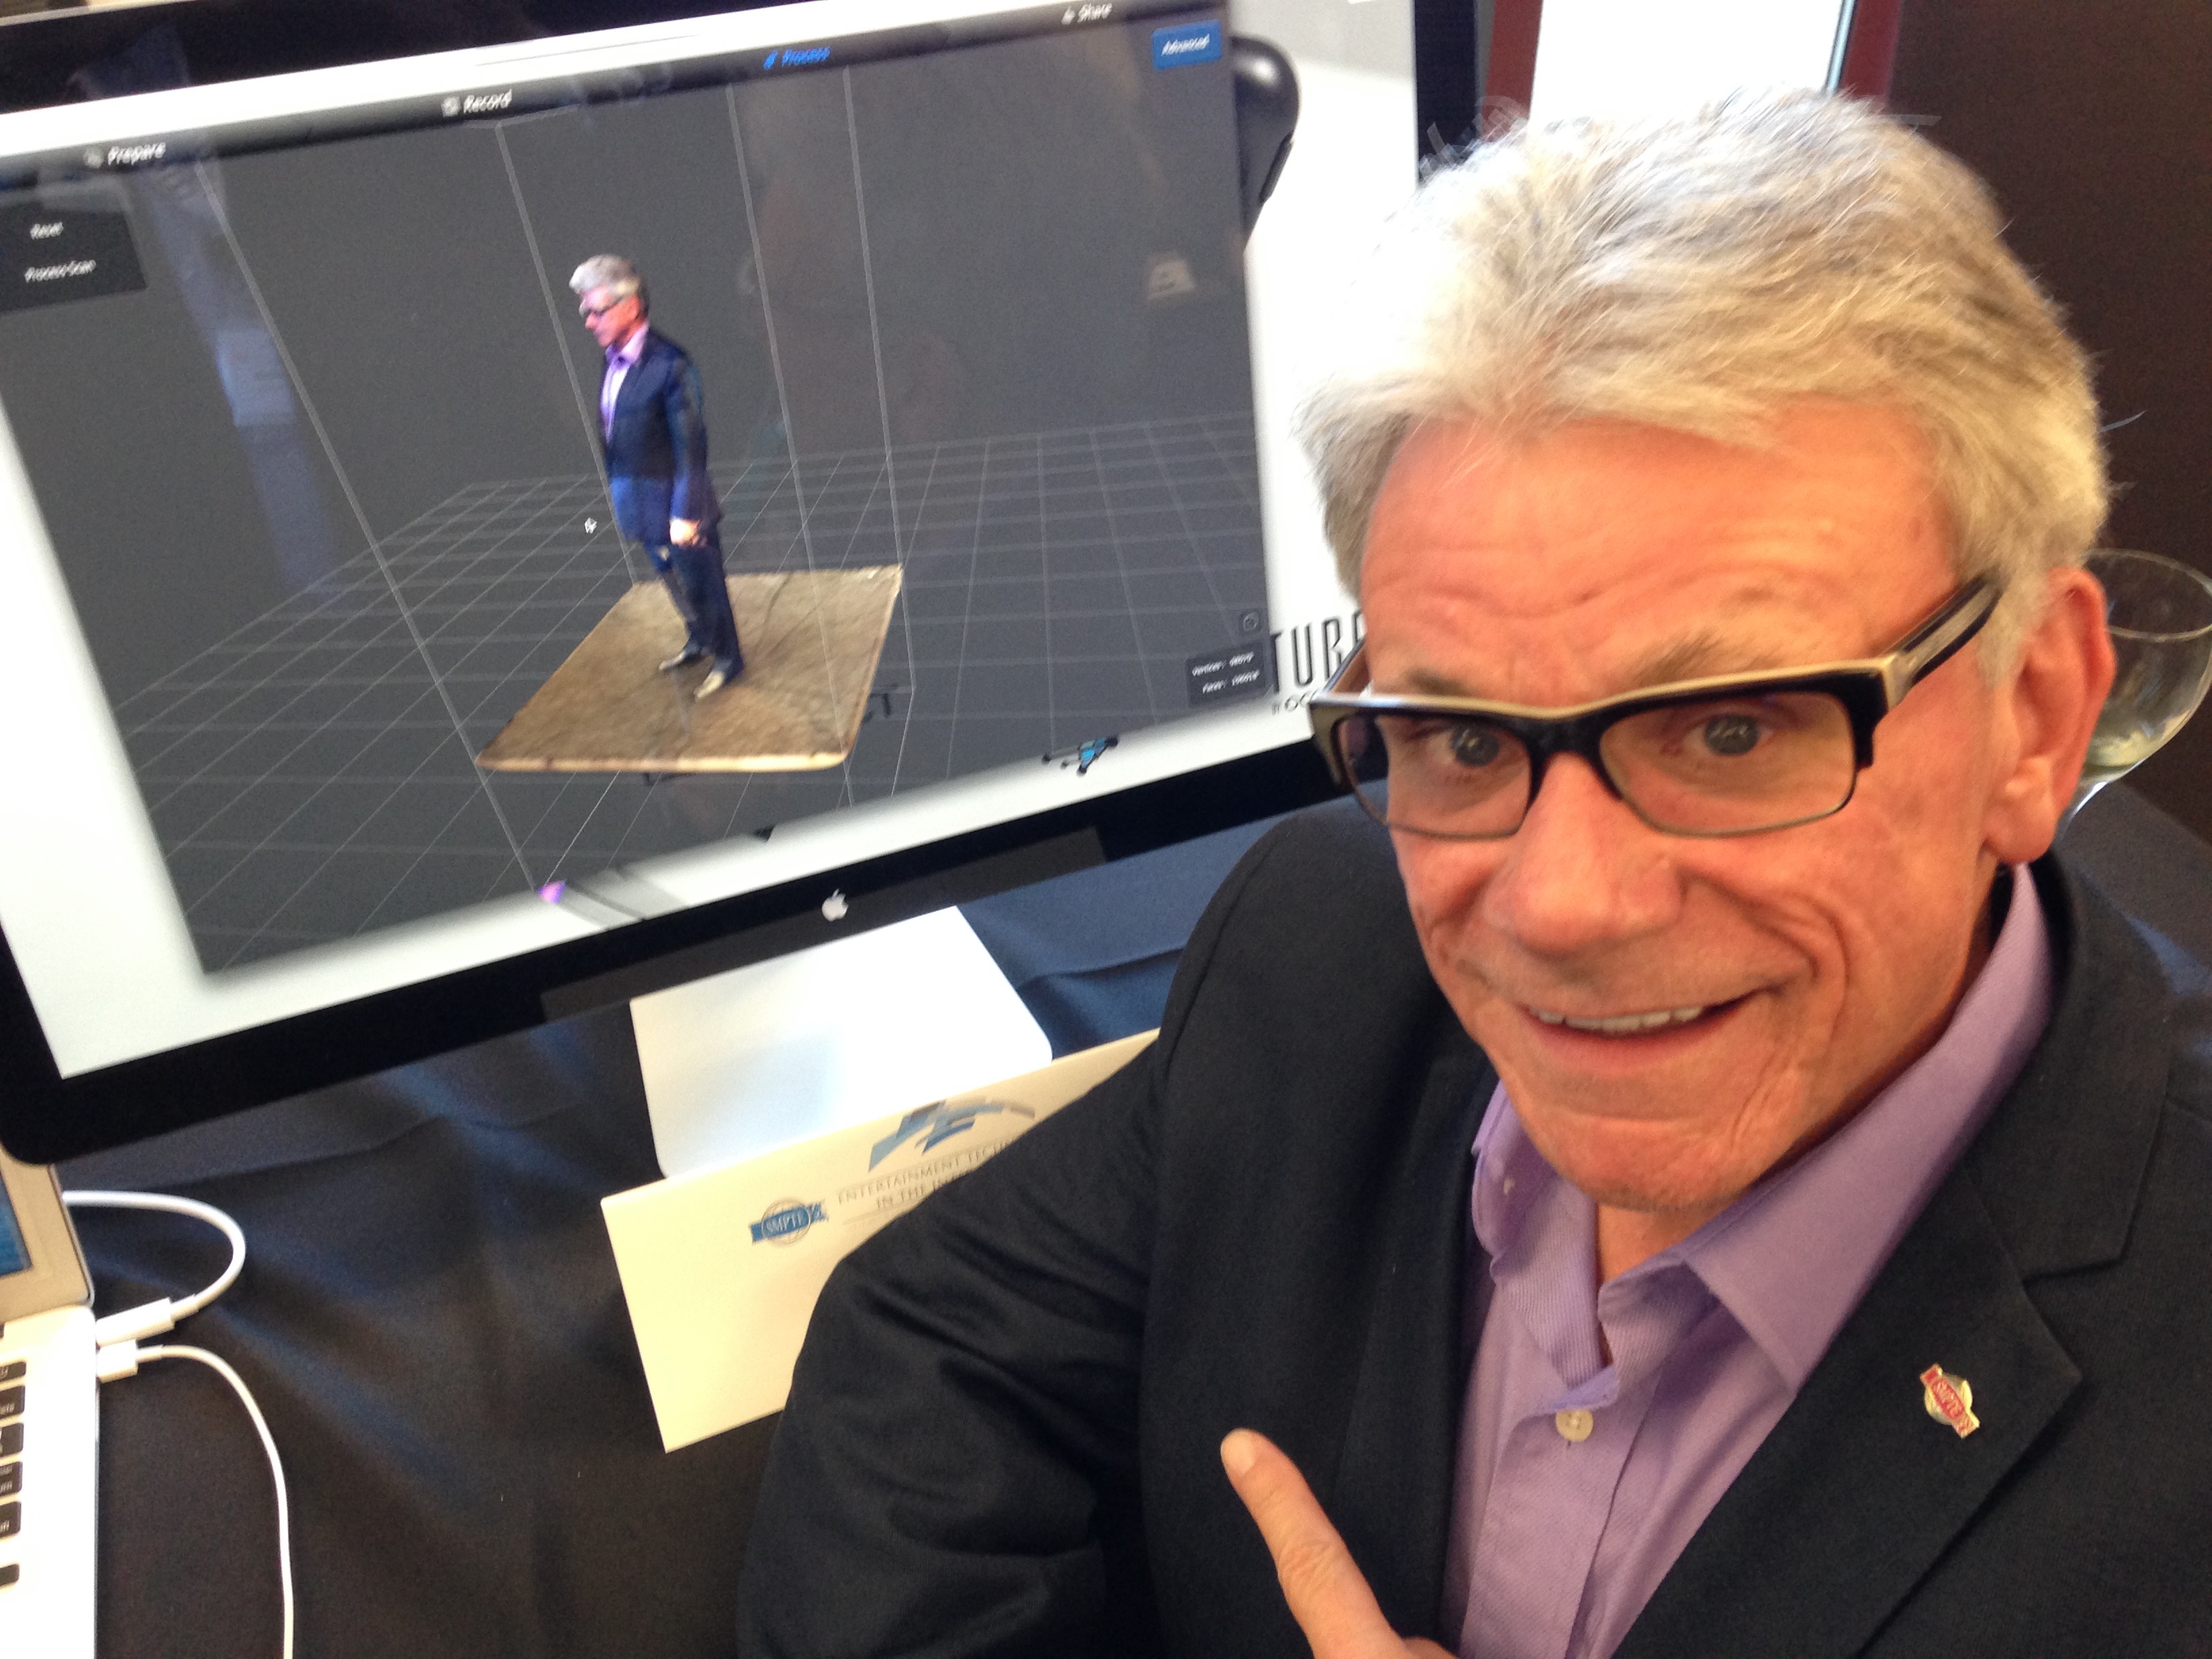 SMPTE Education Vice President Pat Griffis and His Avatar at ETIA 2014